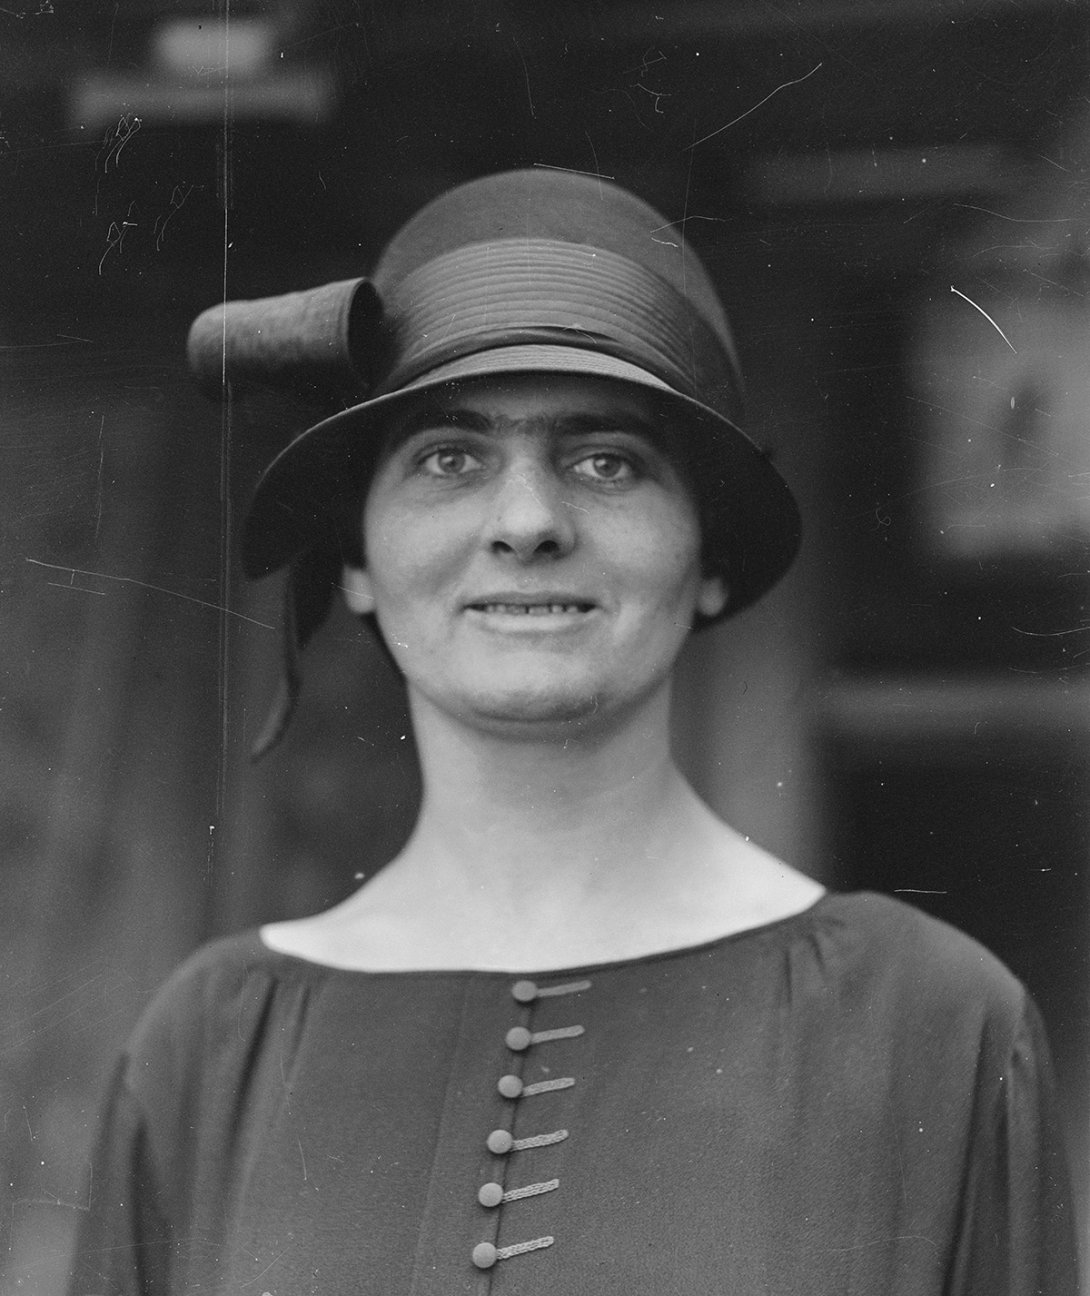 A black and white image of a woman wearing a bowler style had with a bow looking at the camera